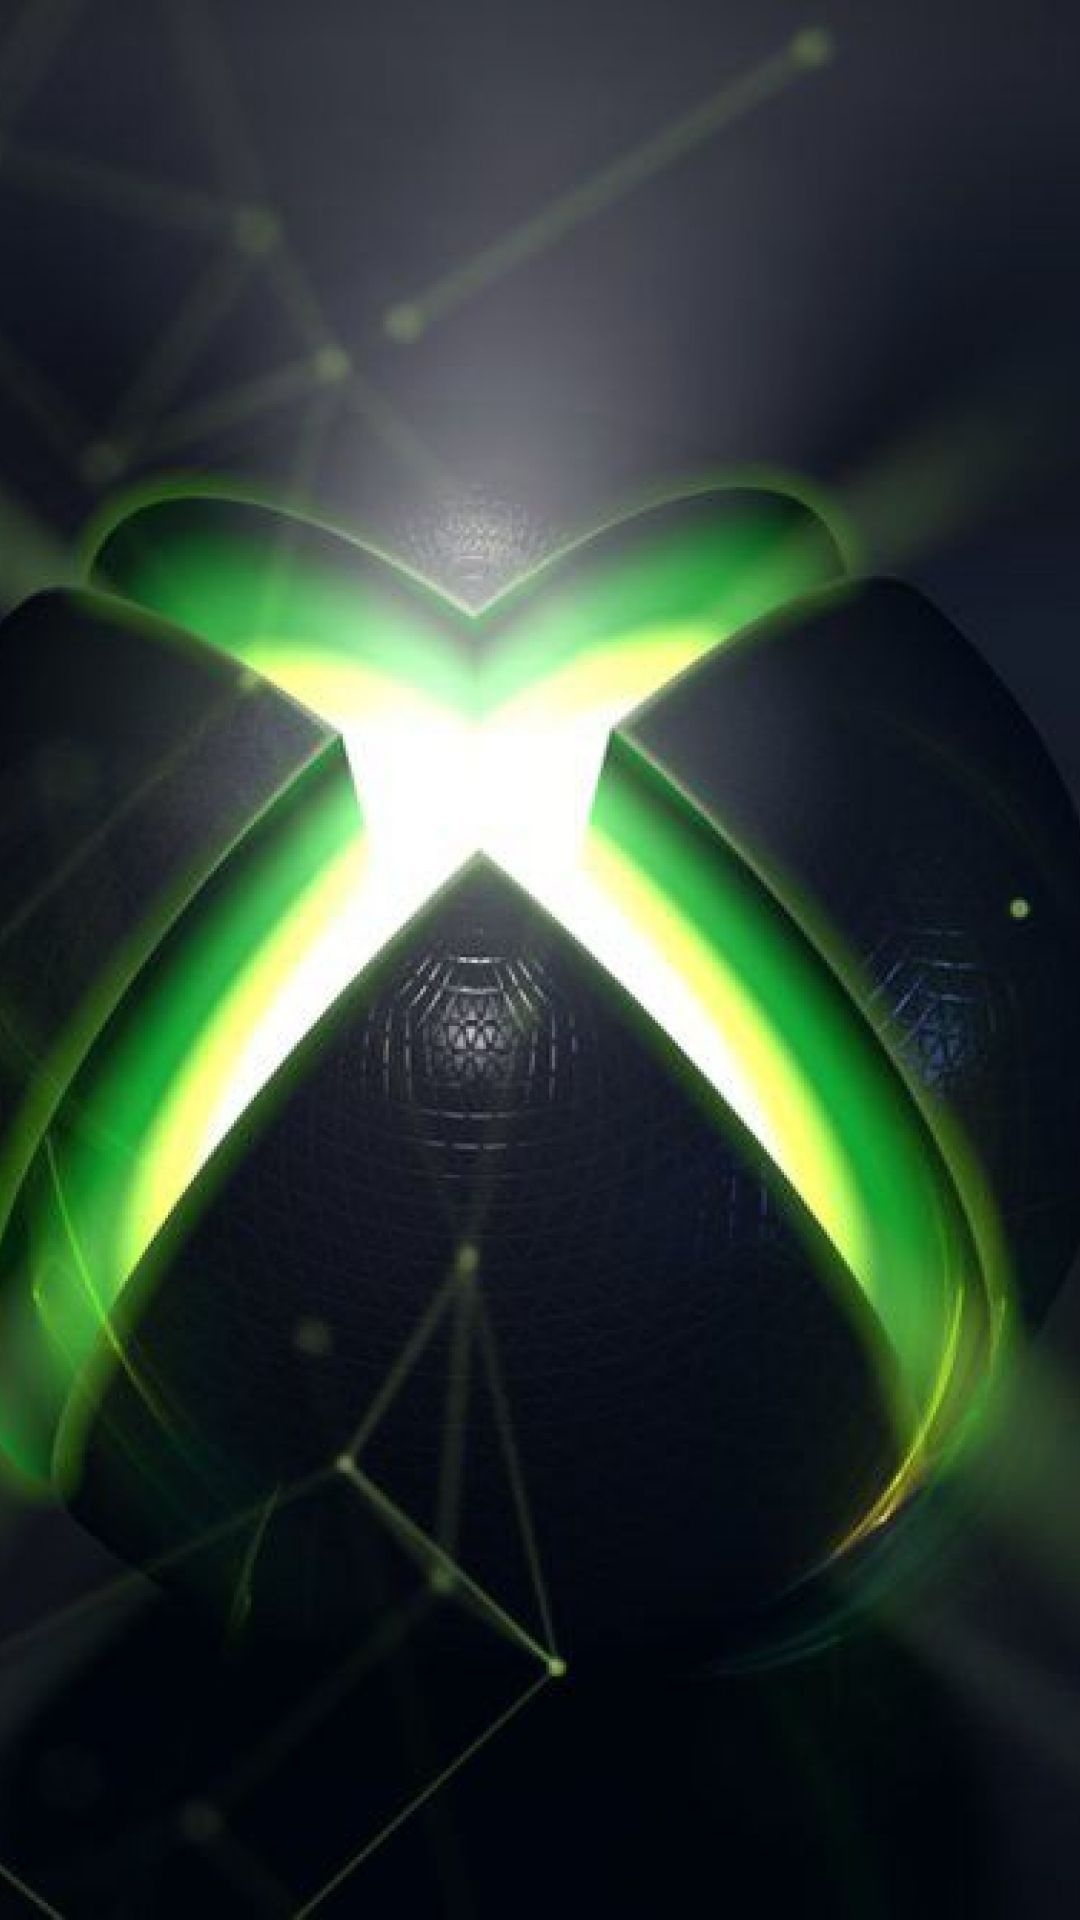 Xbox: A video game console manufactured by Microsoft, Gaming. 1080x1920 Full HD Wallpaper.